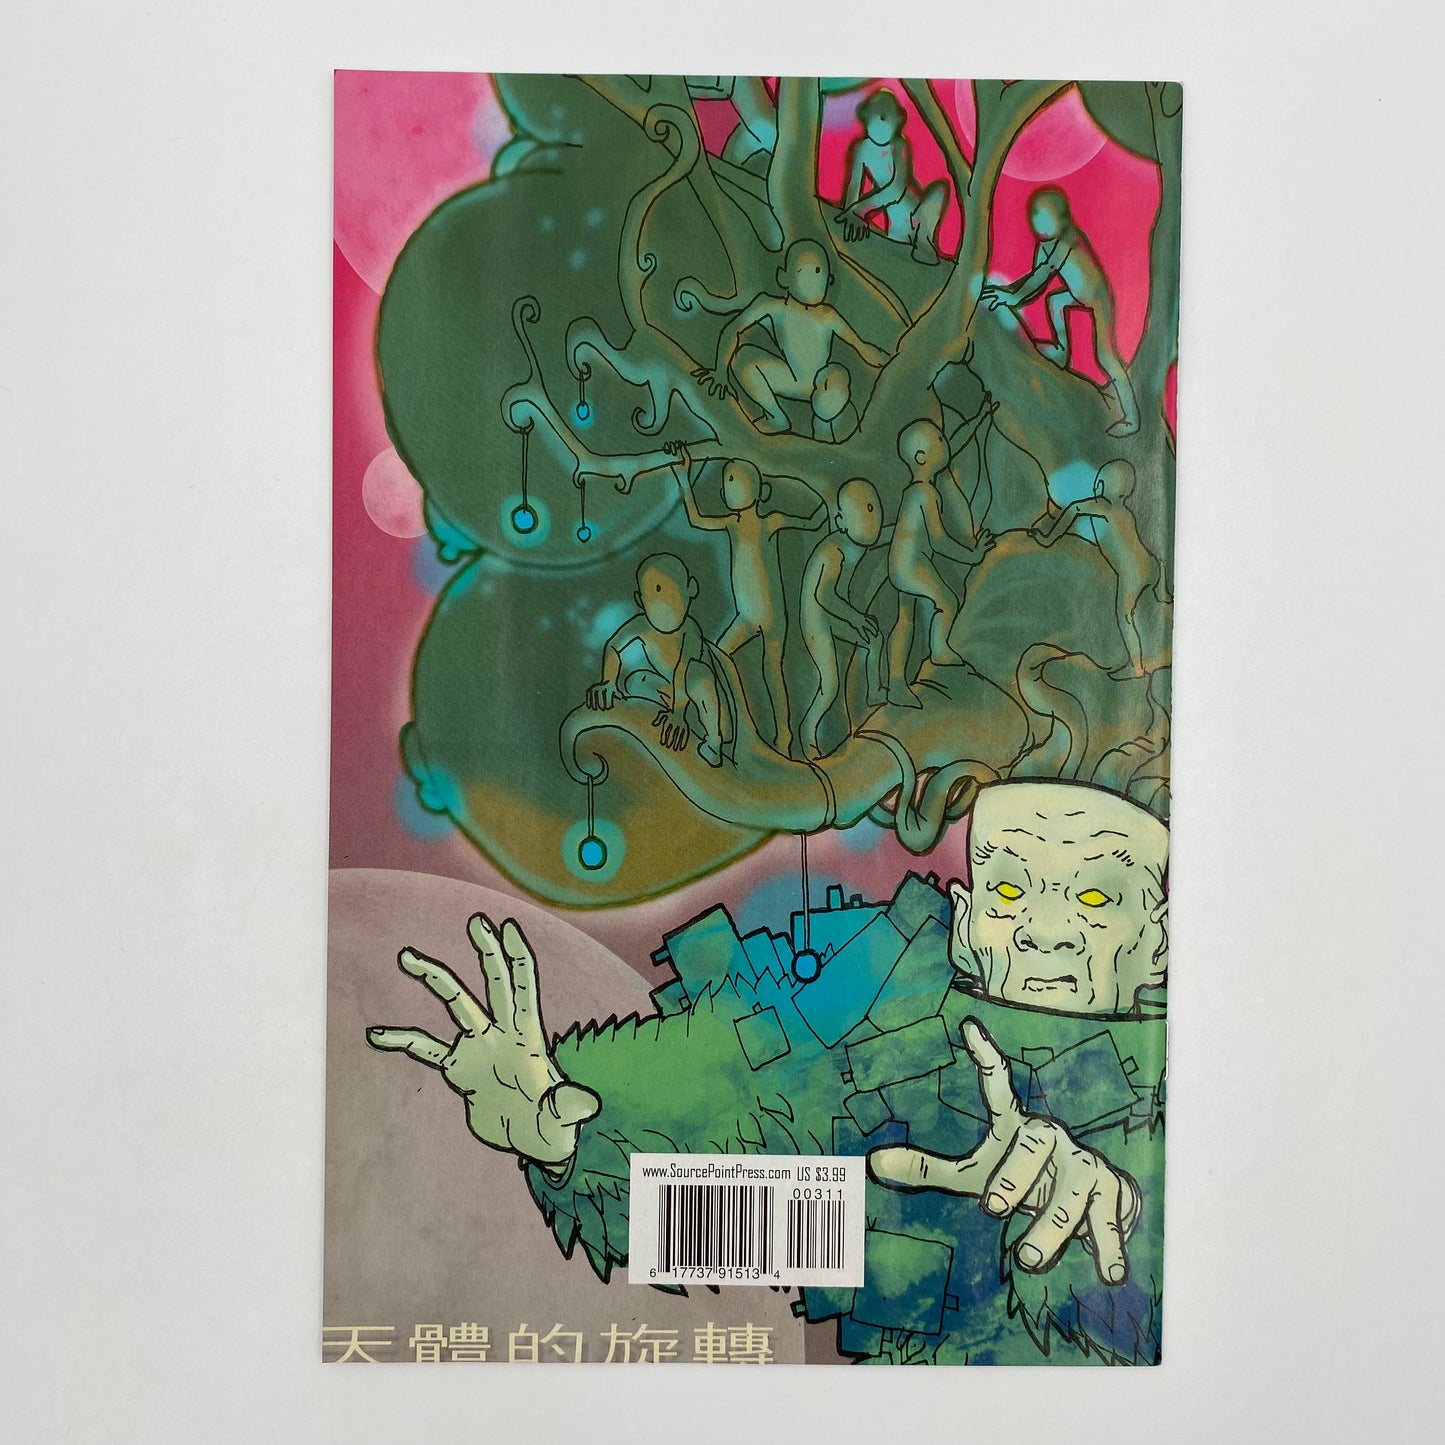 Tales From The Dead Astronaut #1-3 (2021-2022) Source Point Press